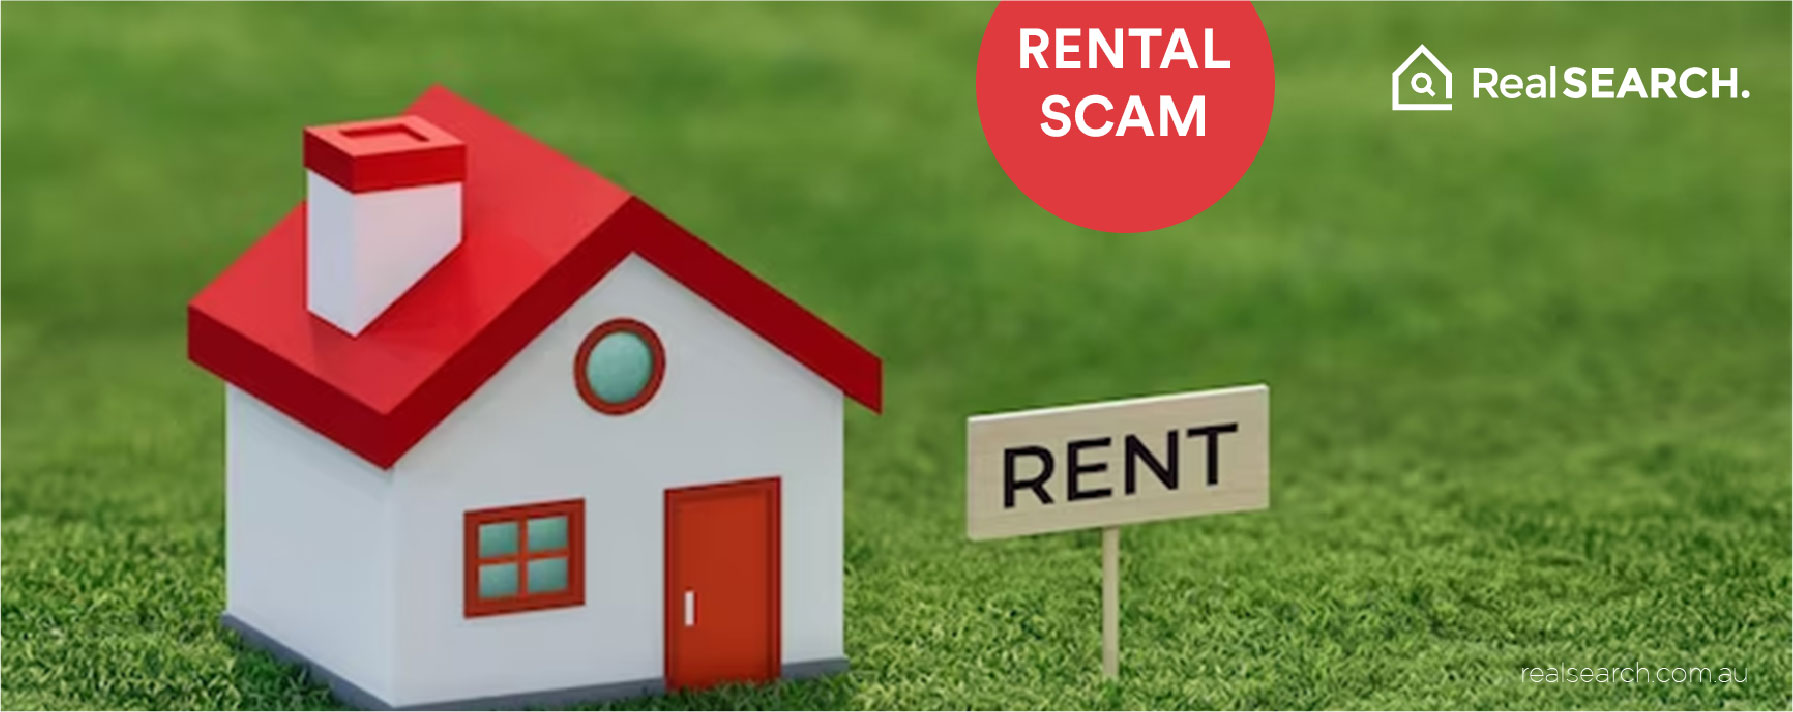 Renting Safely: Protecting Yourself from Rental Scams 